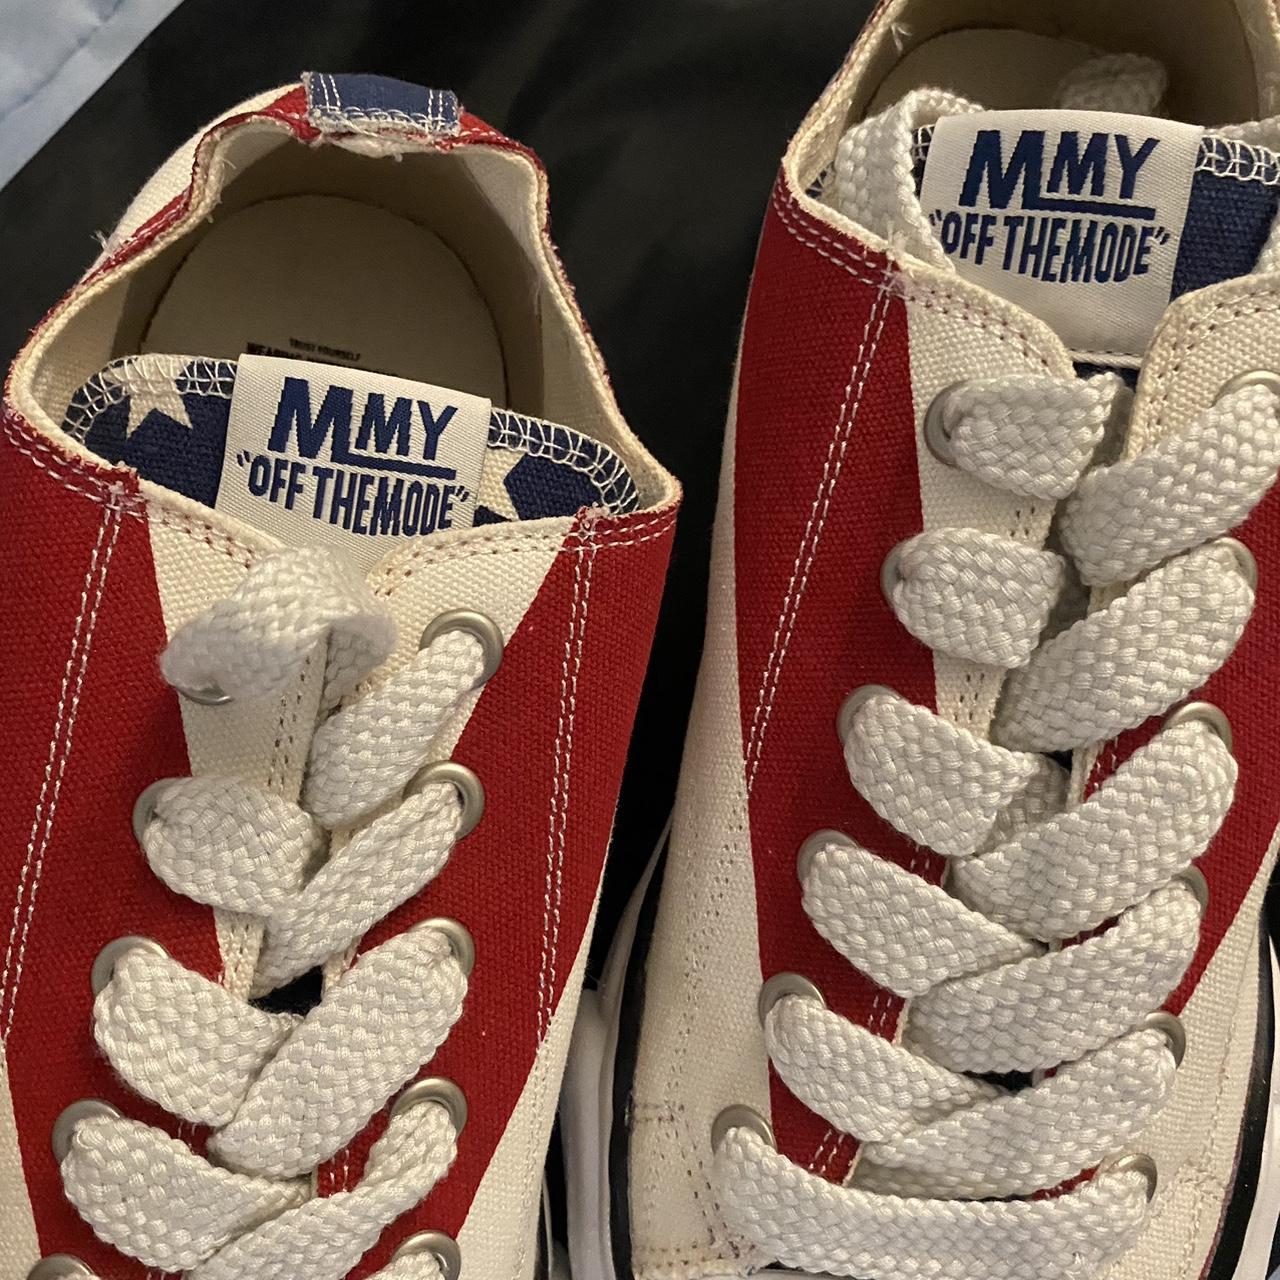 Rare Maison Mihara American Flag Low Tops, MUST